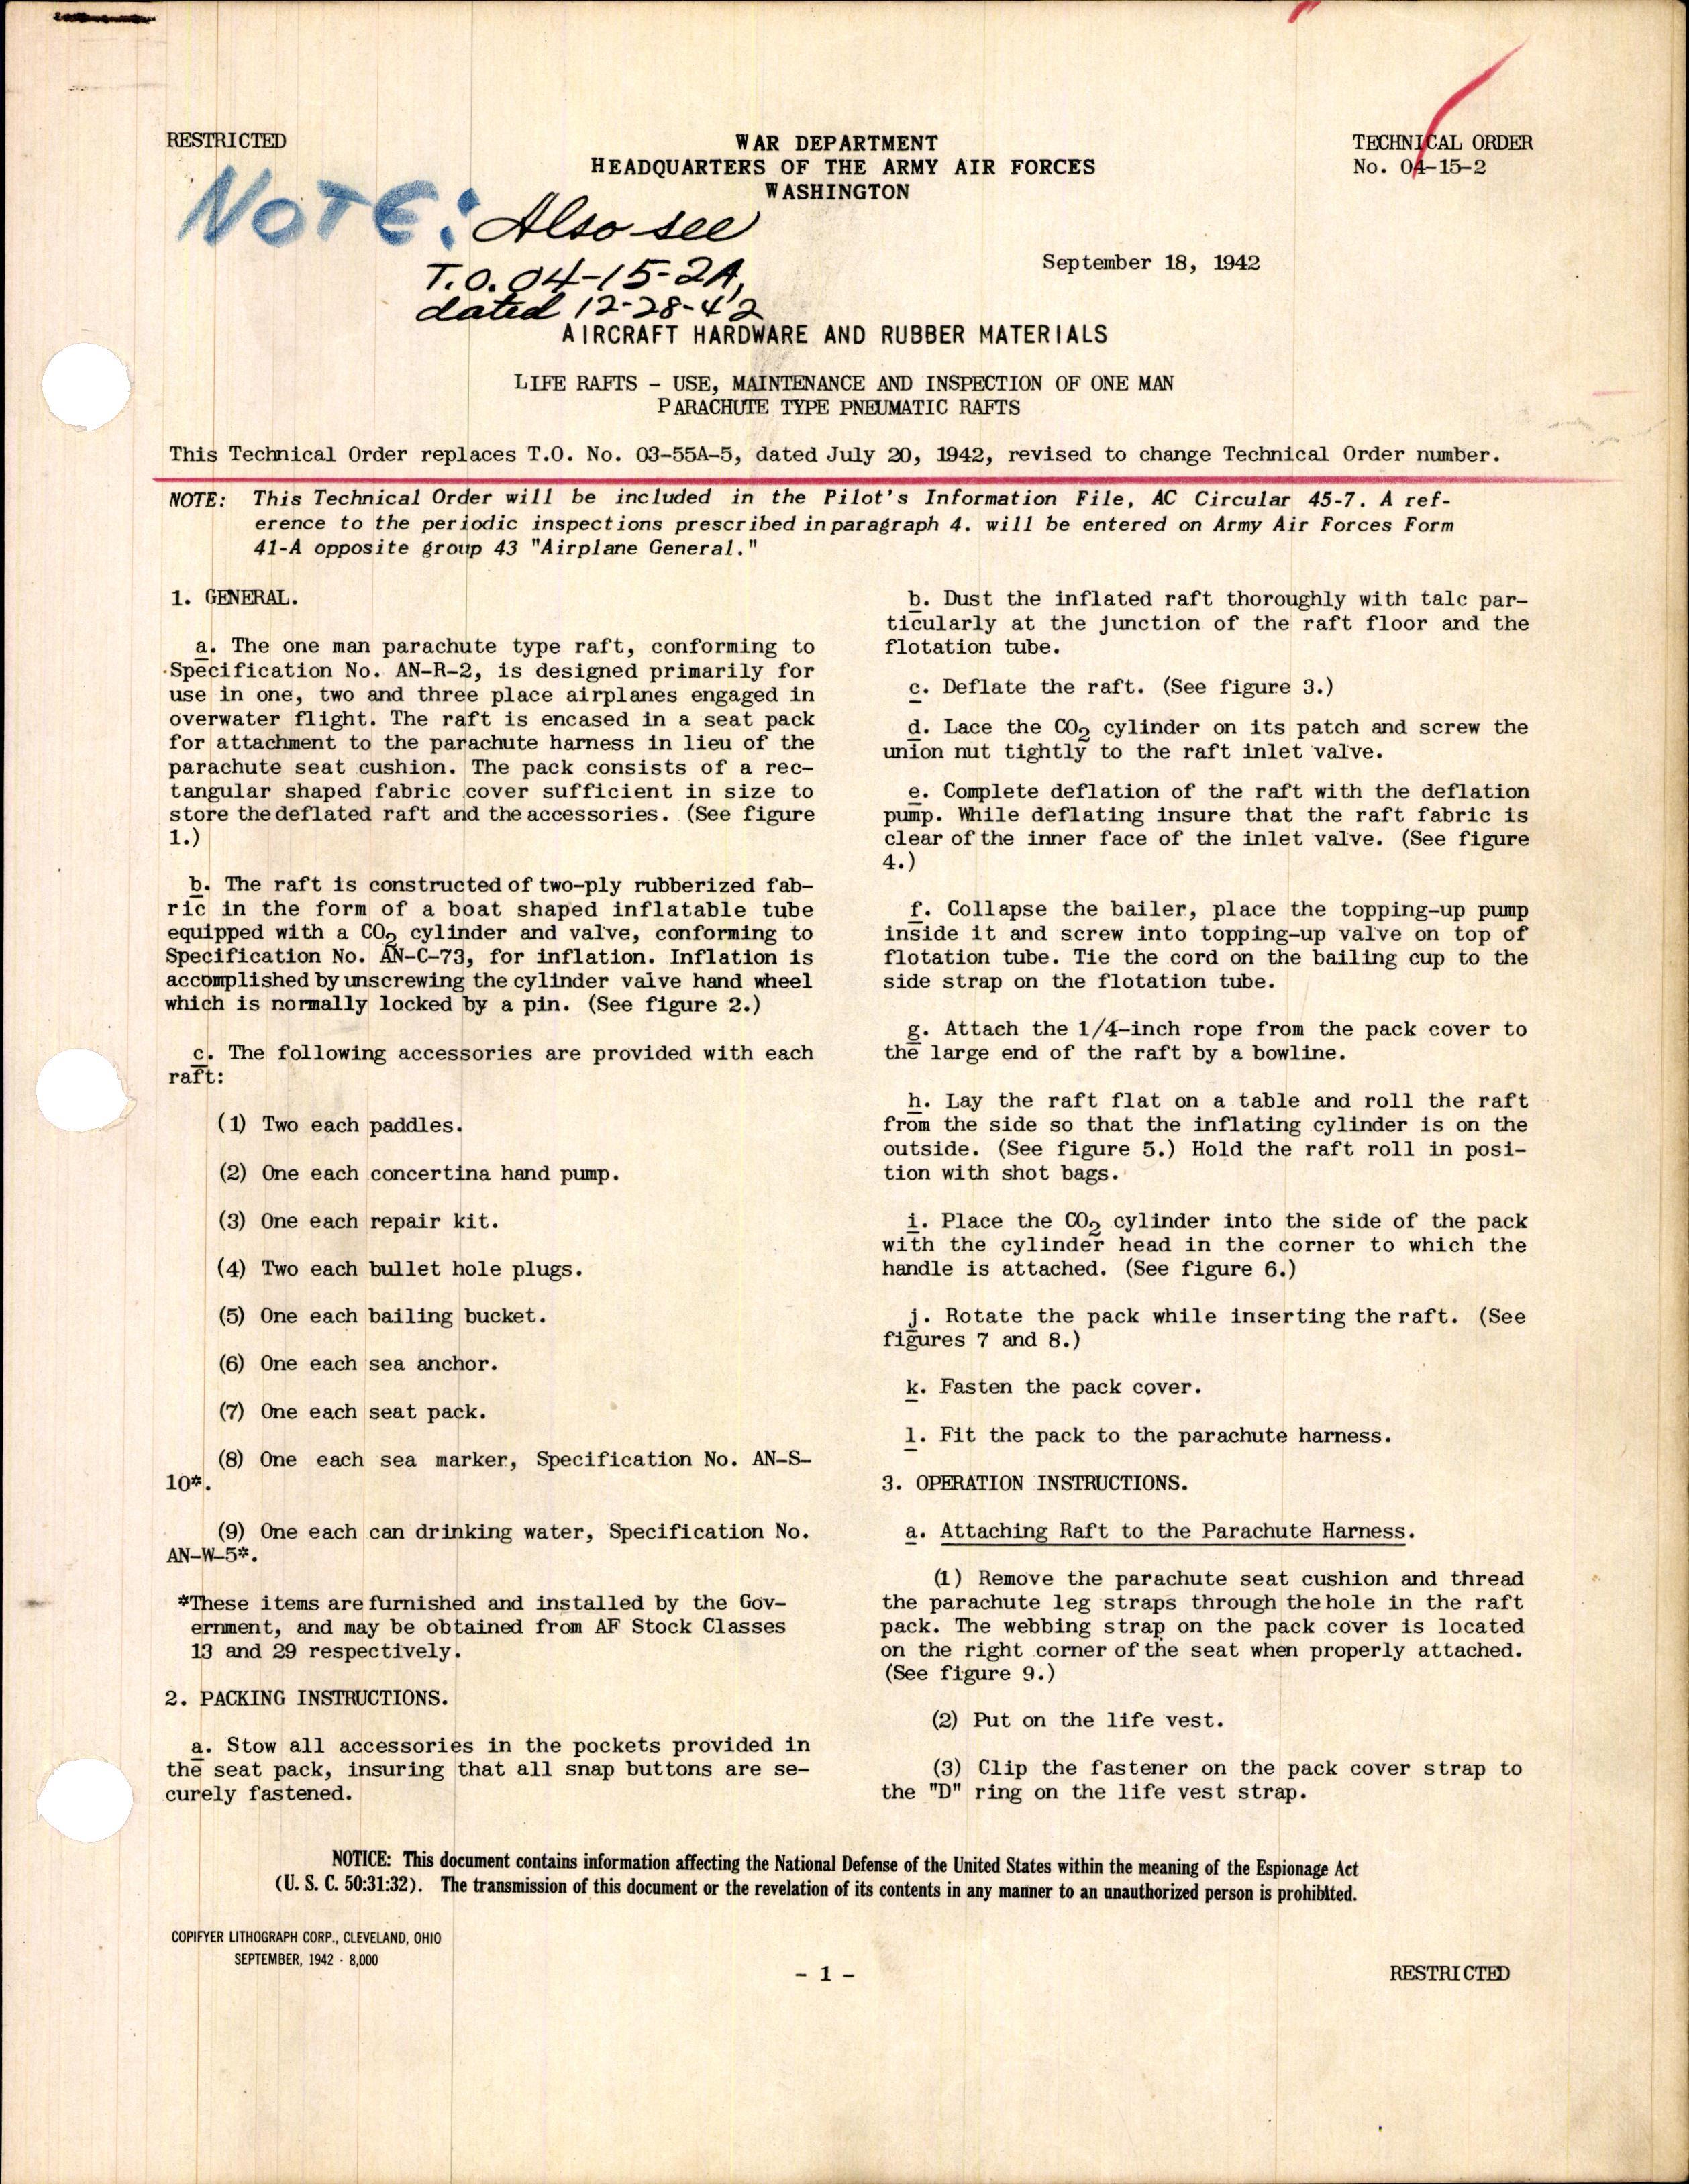 Sample page 1 from AirCorps Library document: Use, Maintenance, and Inspection of One Man Parachute Type Pneumatic Rafts